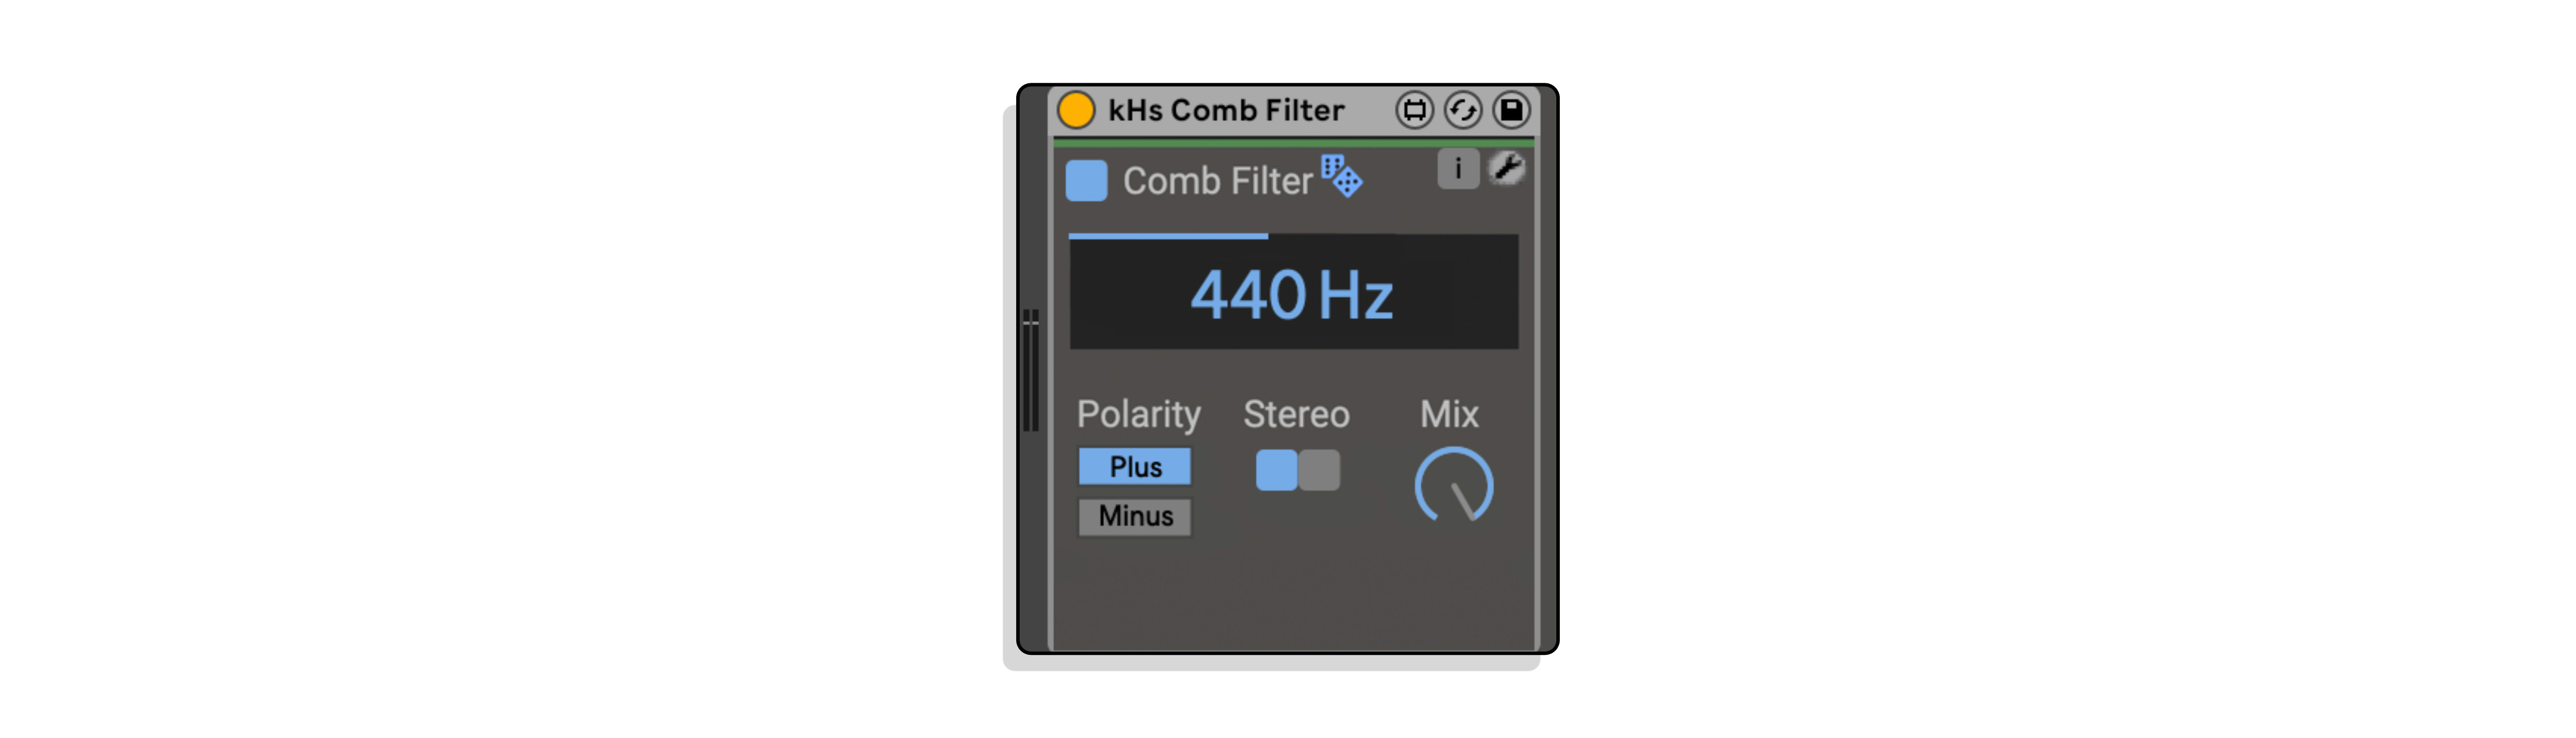 KHZ-Comb-Filter-Wide-Device-Template